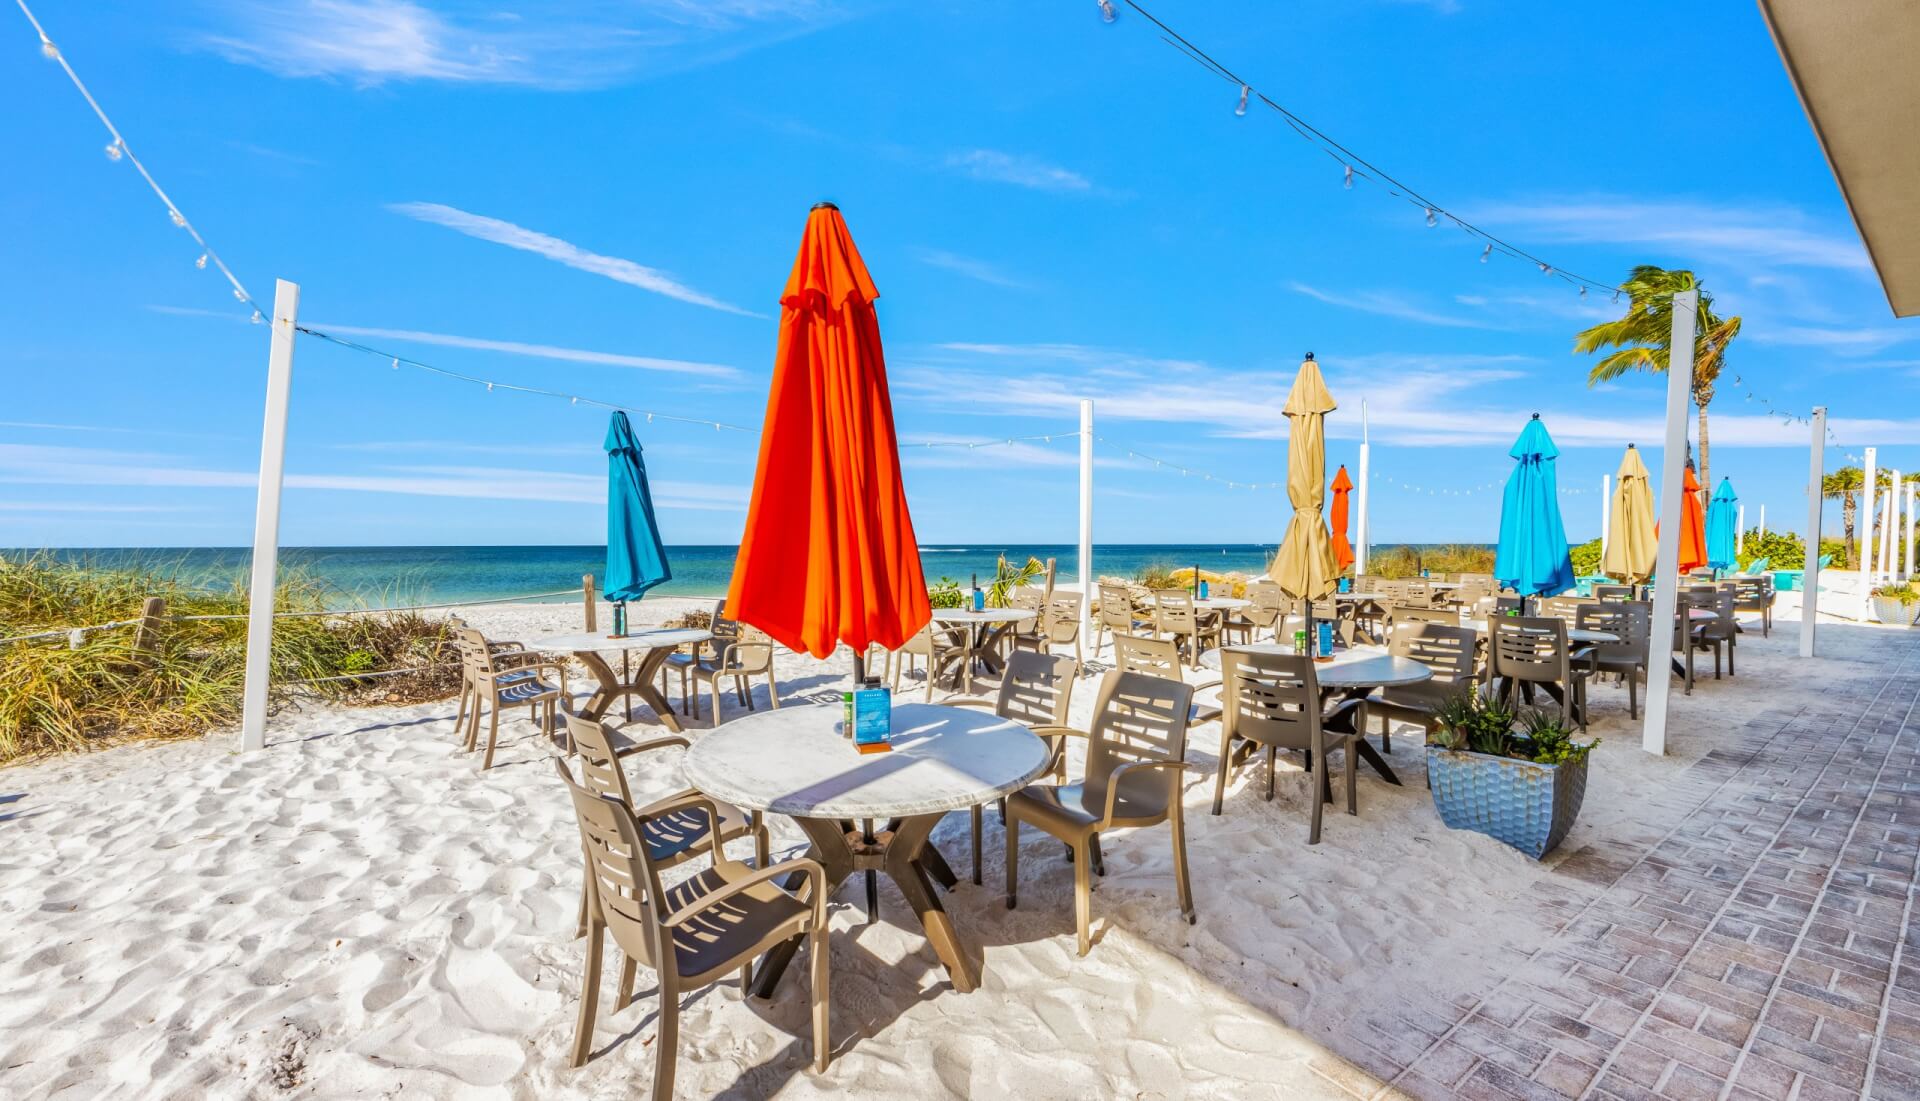 day exterior of beach house watefront restaurant with bright umbrellas and tables in the sand